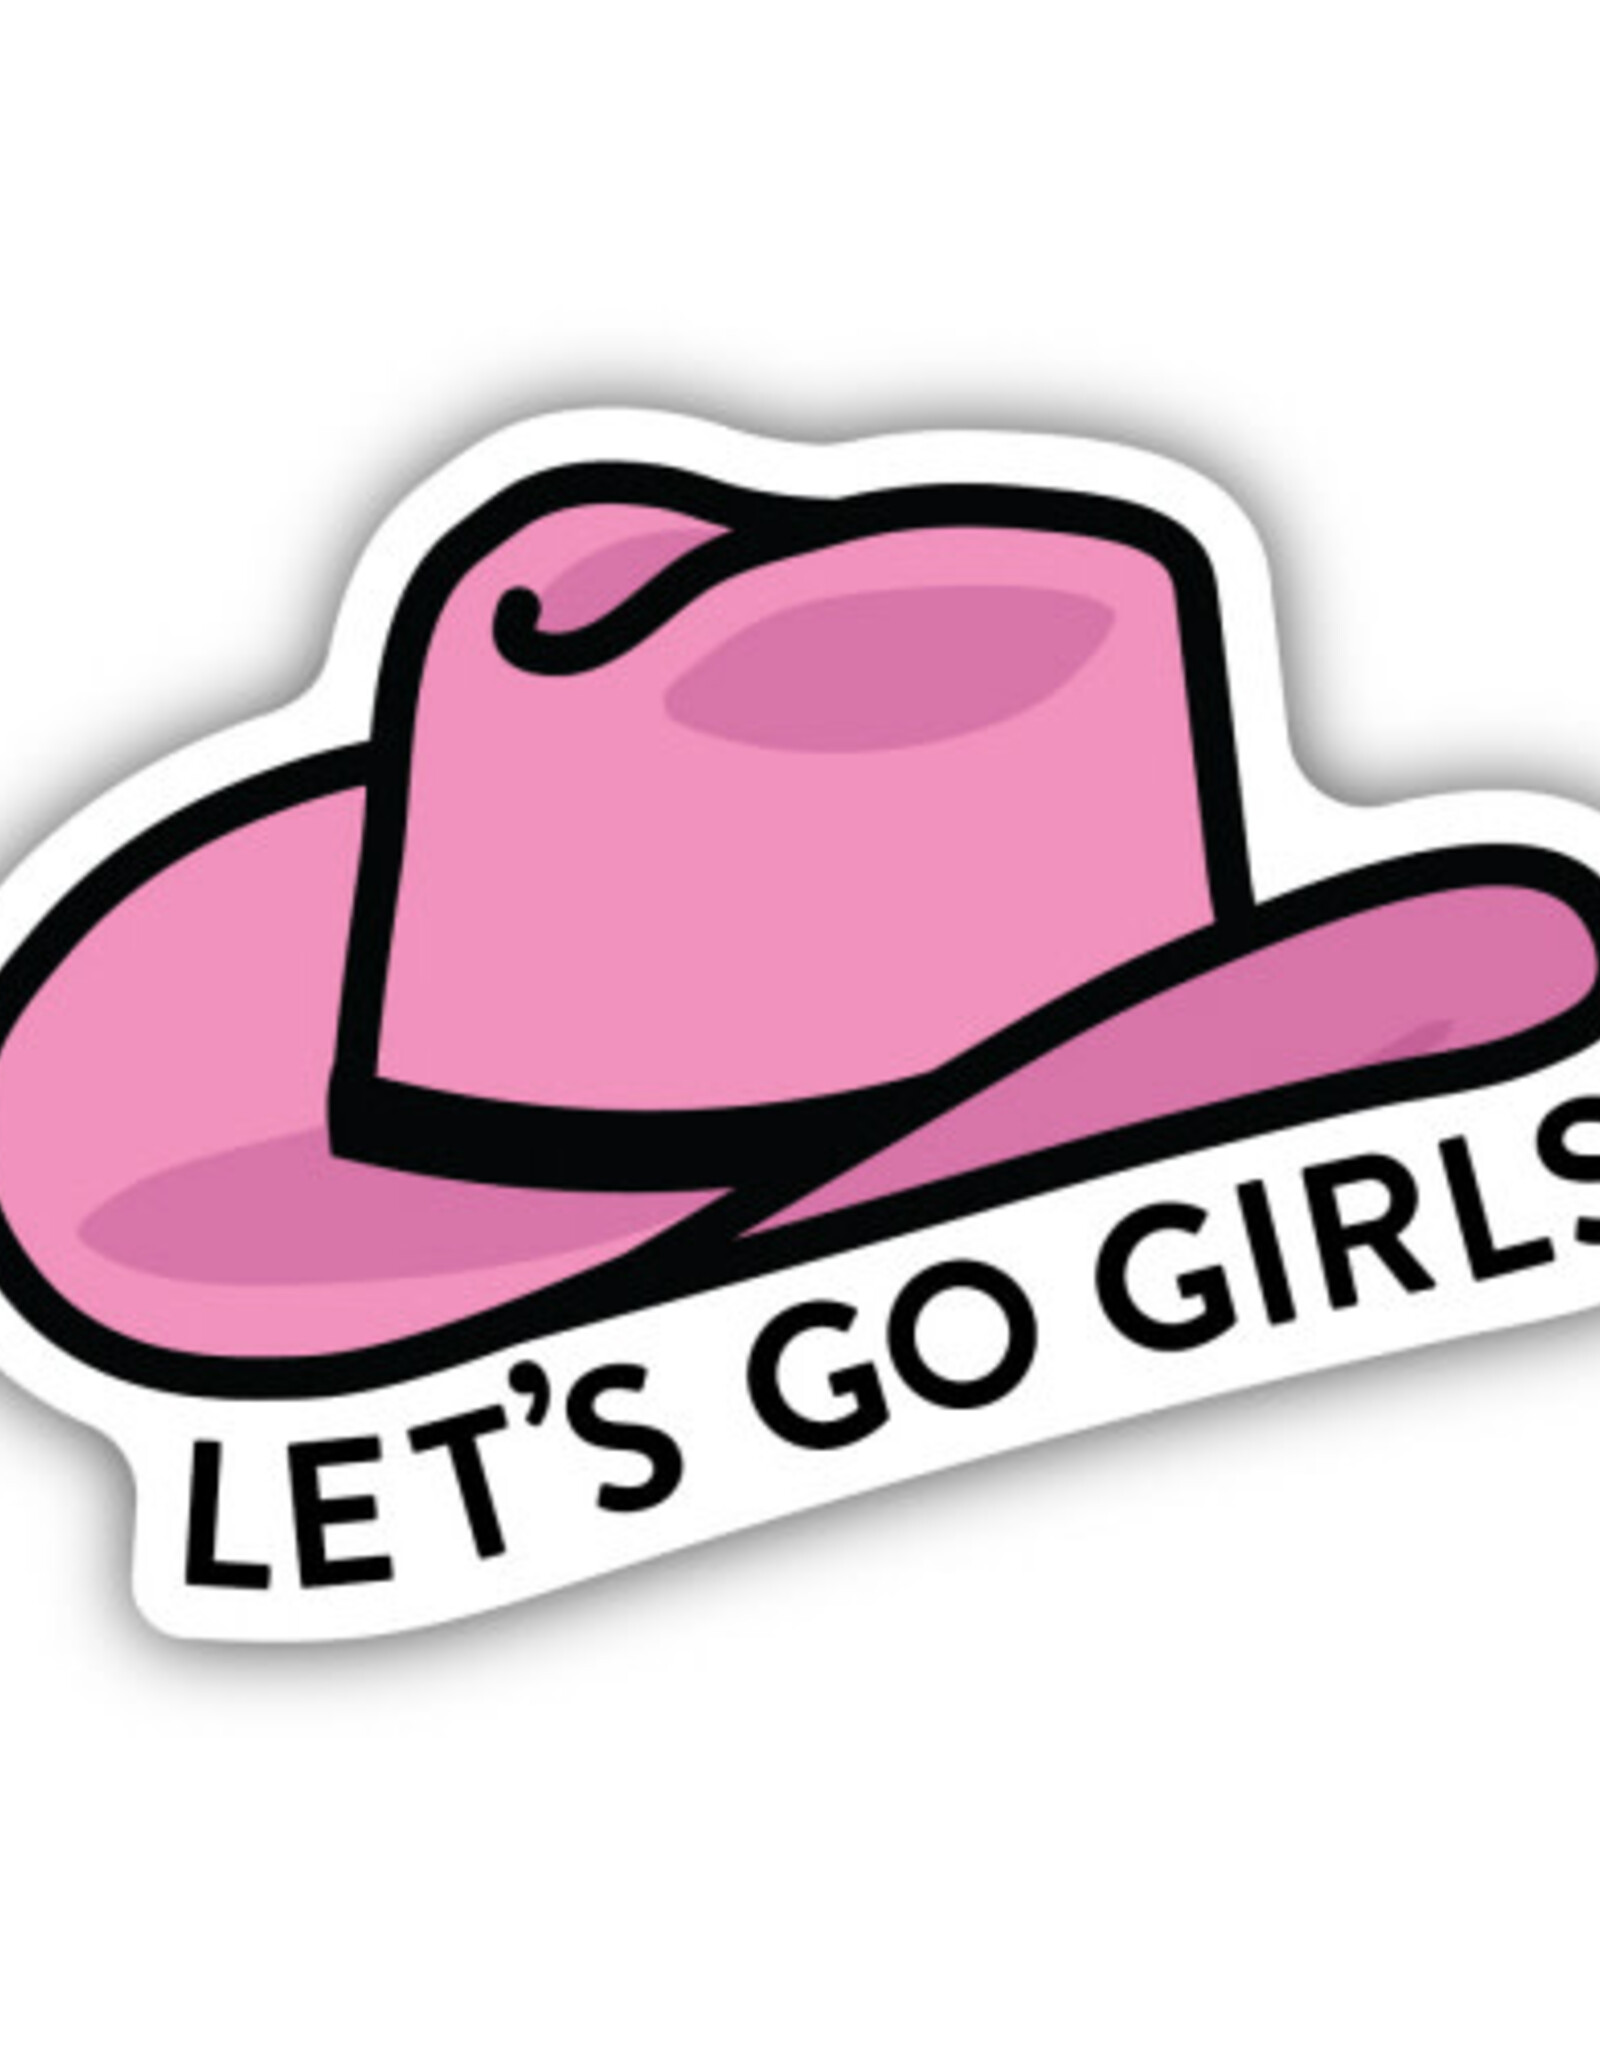 Northwest Stickers NW Stickers Let's Go Girls